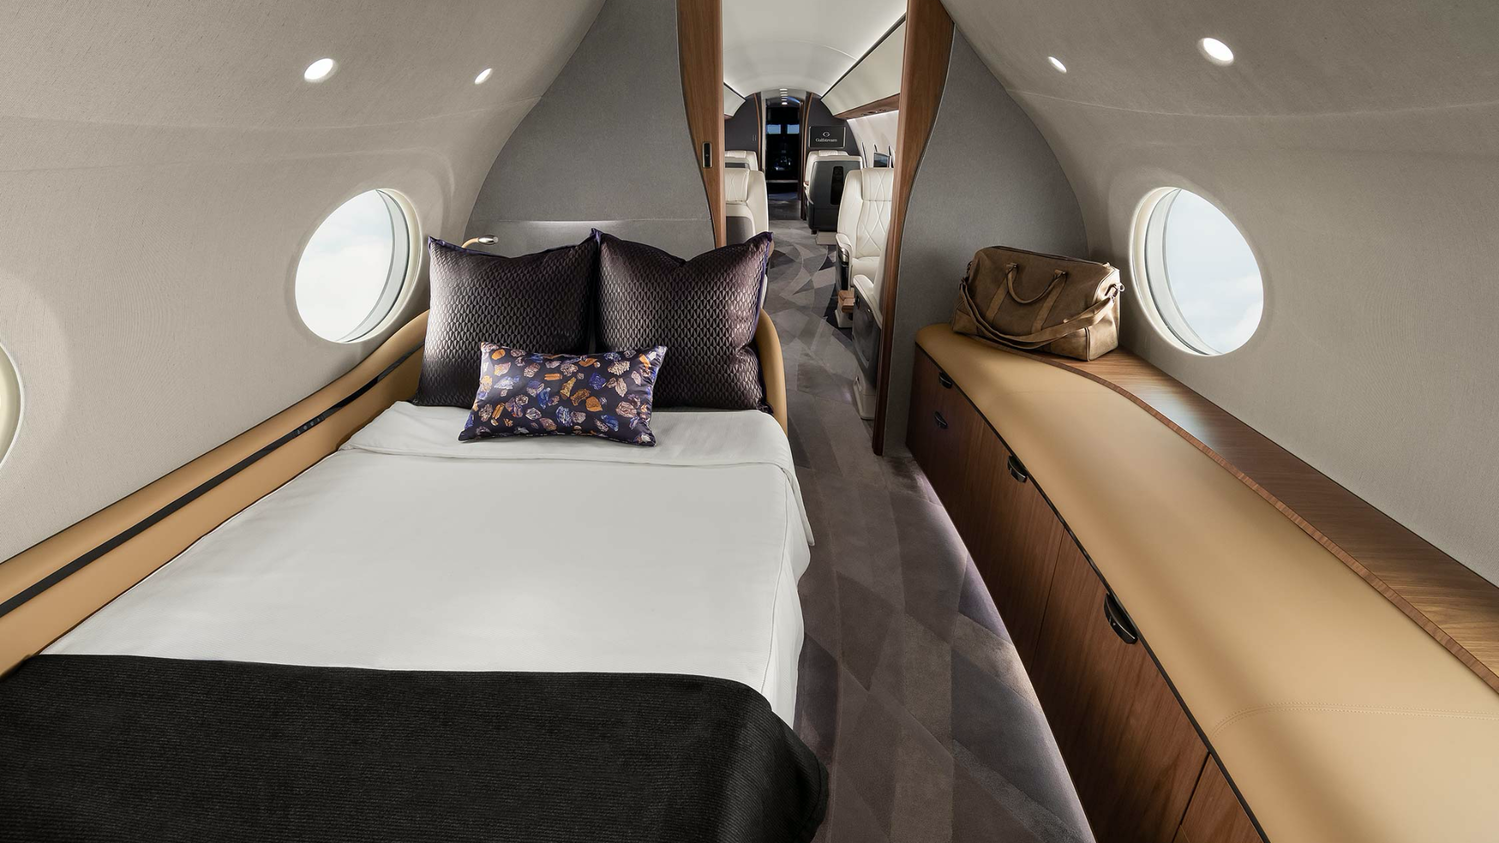 Qatar is launch customer for Gulfstream's new G700 private jet ...